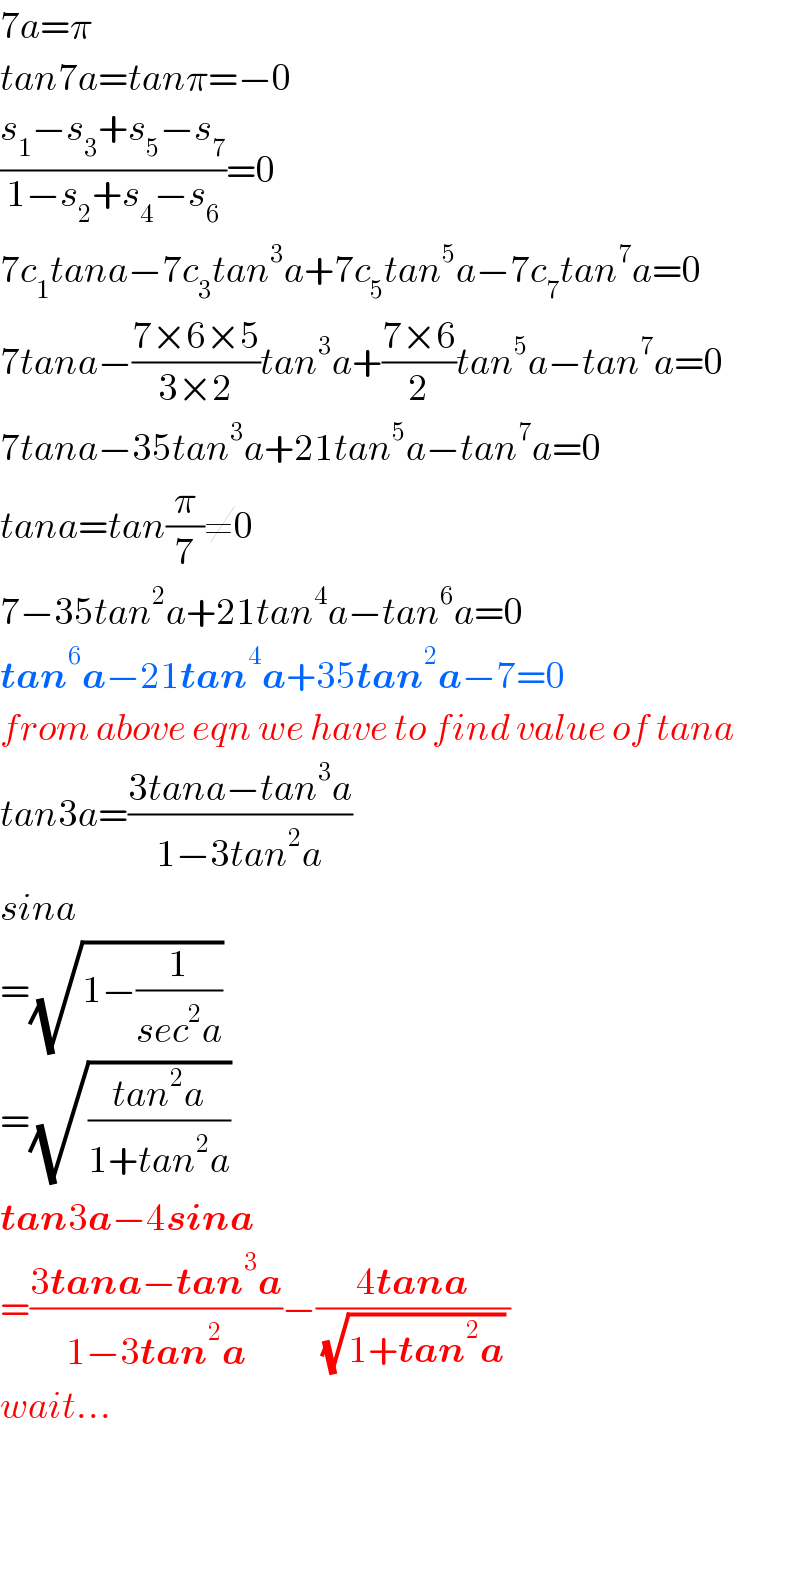 7a=π  tan7a=tanπ=−0  ((s_1 −s_3 +s_5 −s_7 )/(1−s_2 +s_4 −s_6 ))=0  7c_1 tana−7c_3 tan^3 a+7c_5 tan^5 a−7c_7 tan^7 a=0  7tana−((7×6×5)/(3×2))tan^3 a+((7×6)/2)tan^5 a−tan^7 a=0  7tana−35tan^3 a+21tan^5 a−tan^7 a=0  tana=tan(π/7)≠0  7−35tan^2 a+21tan^4 a−tan^6 a=0  tan^6 a−21tan^4 a+35tan^2 a−7=0  from above eqn we have to find value of tana  tan3a=((3tana−tan^3 a)/(1−3tan^2 a))  sina  =(√(1−(1/(sec^2 a))))    =(√((tan^2 a)/(1+tan^2 a)))   tan3a−4sina  =((3tana−tan^3 a)/(1−3tan^2 a))−((4tana)/((√(1+tan^2 a)) ))  wait...      